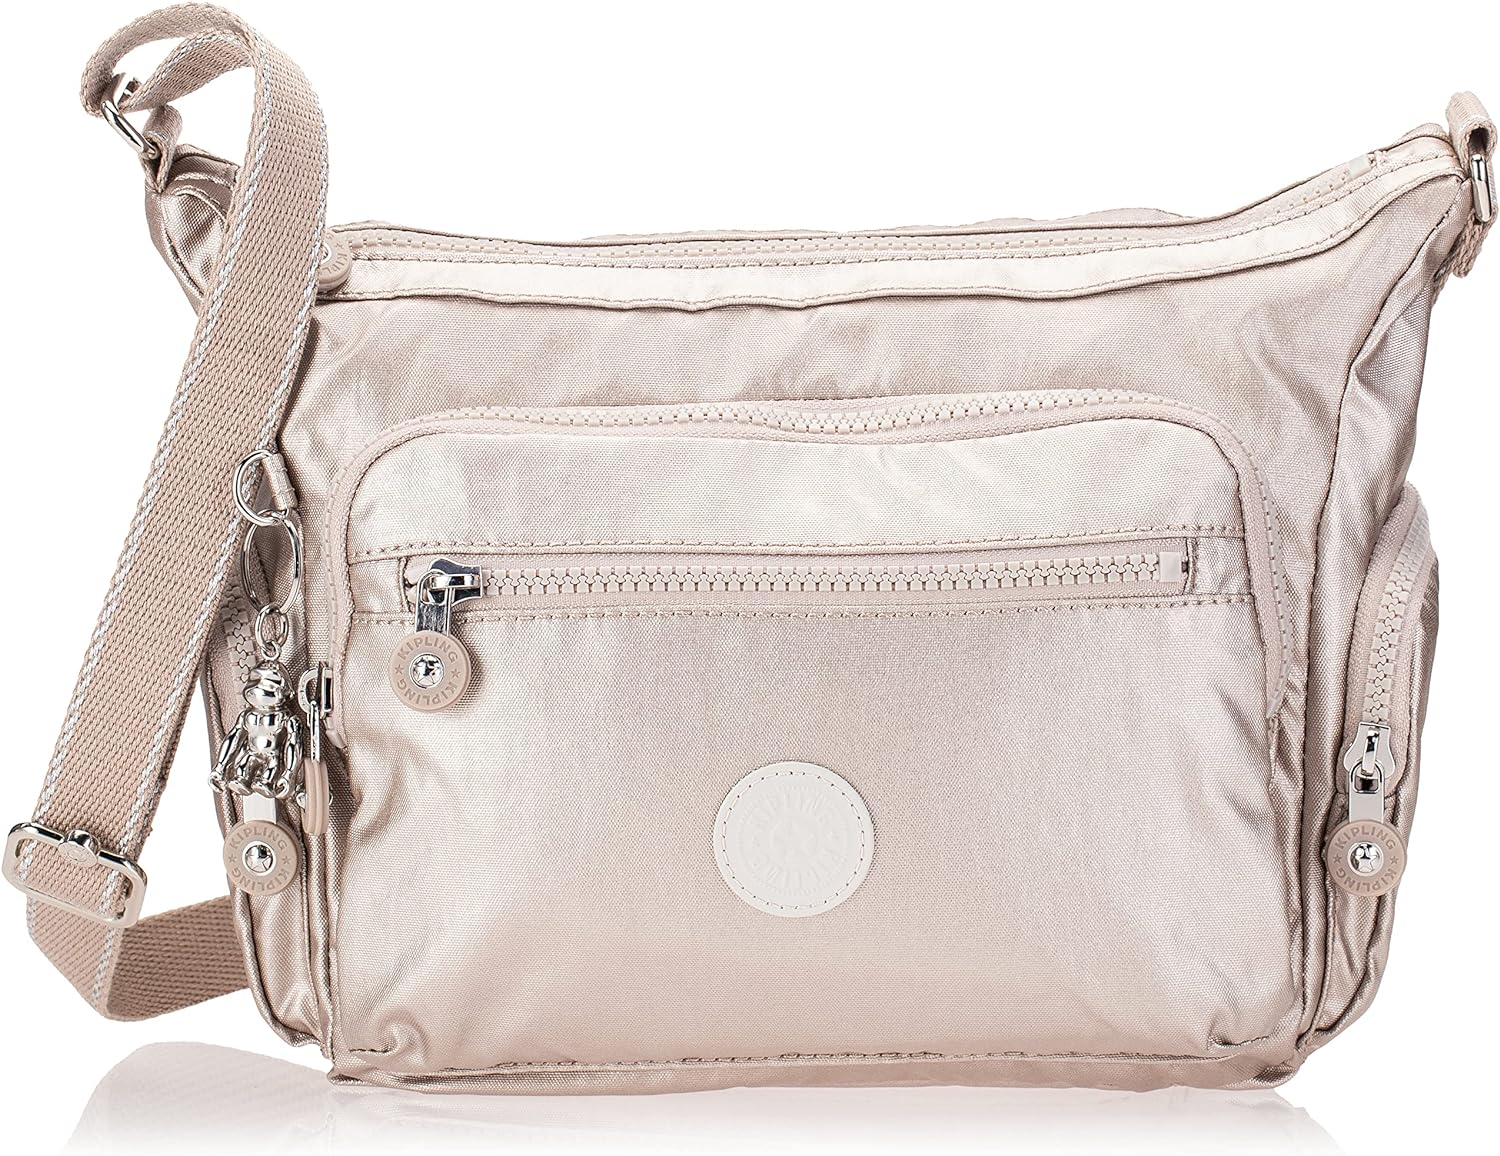 Are You Looking For a Cute Mini Crossbody Purse: Discover Why the Kipling Art Mini Bag is a Must-Have